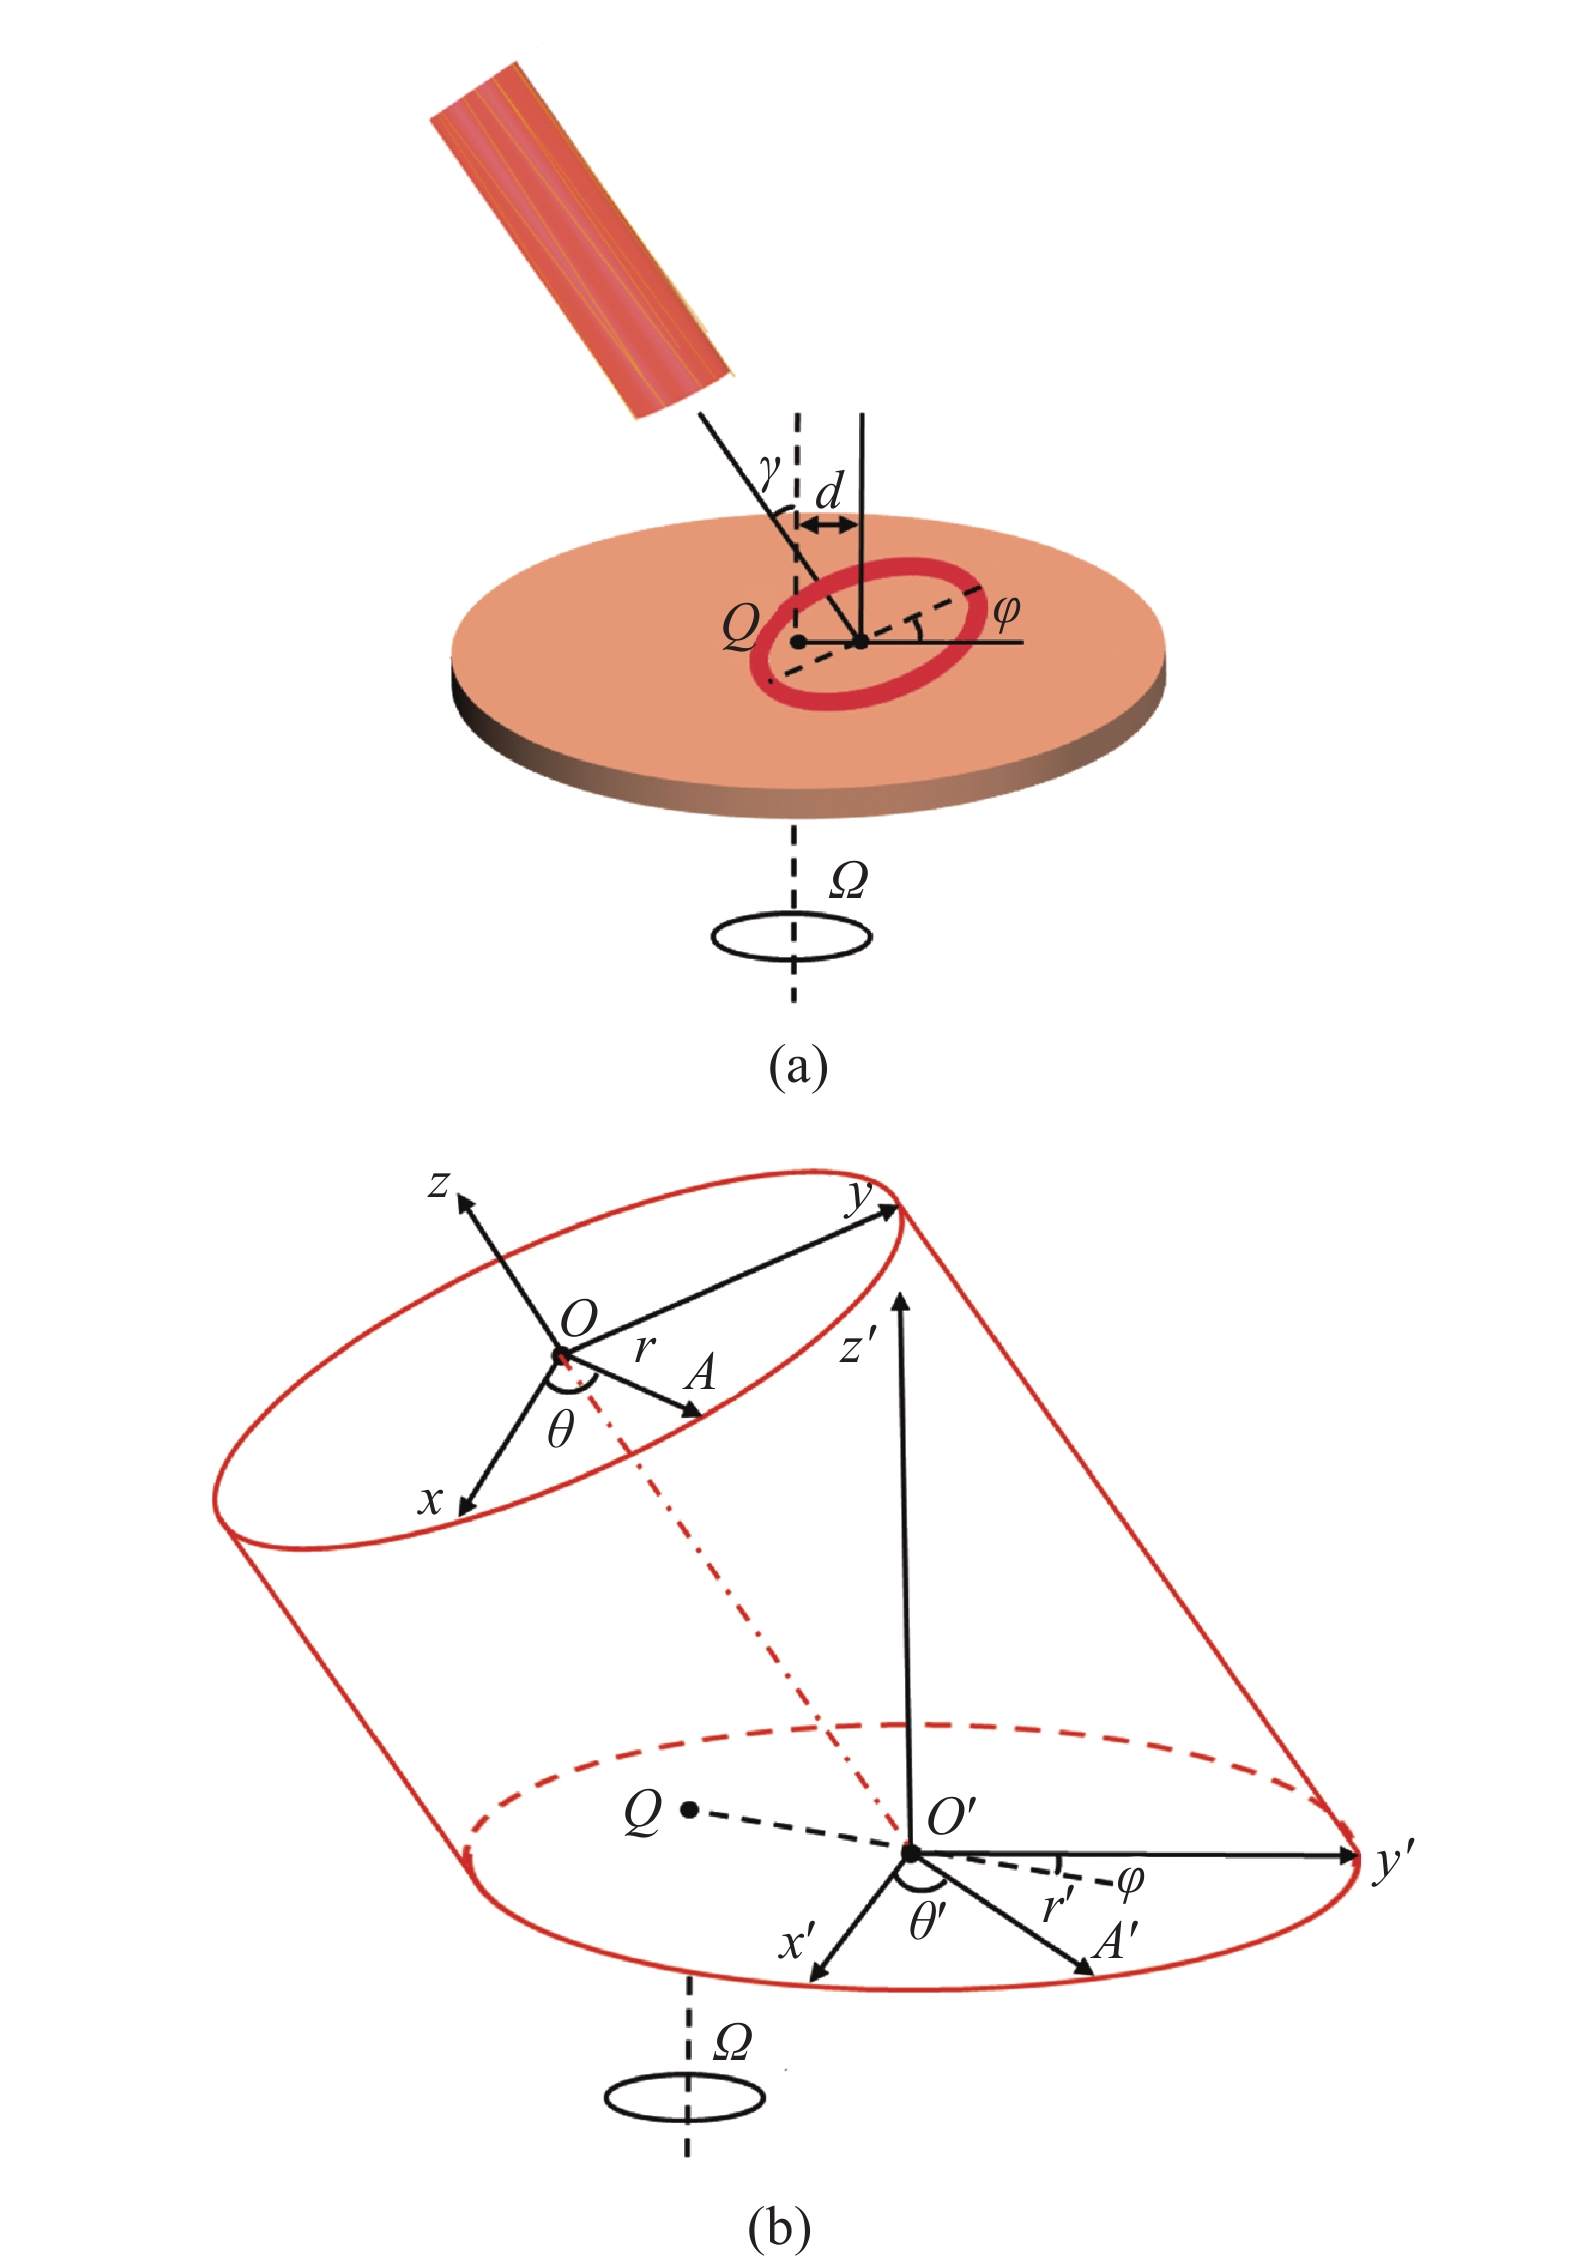 (a) A vortex beam illuminates on the surface of a rotating object at general incidence; (b) Coordinate systems of the vortex beam and beam spot on the object surface